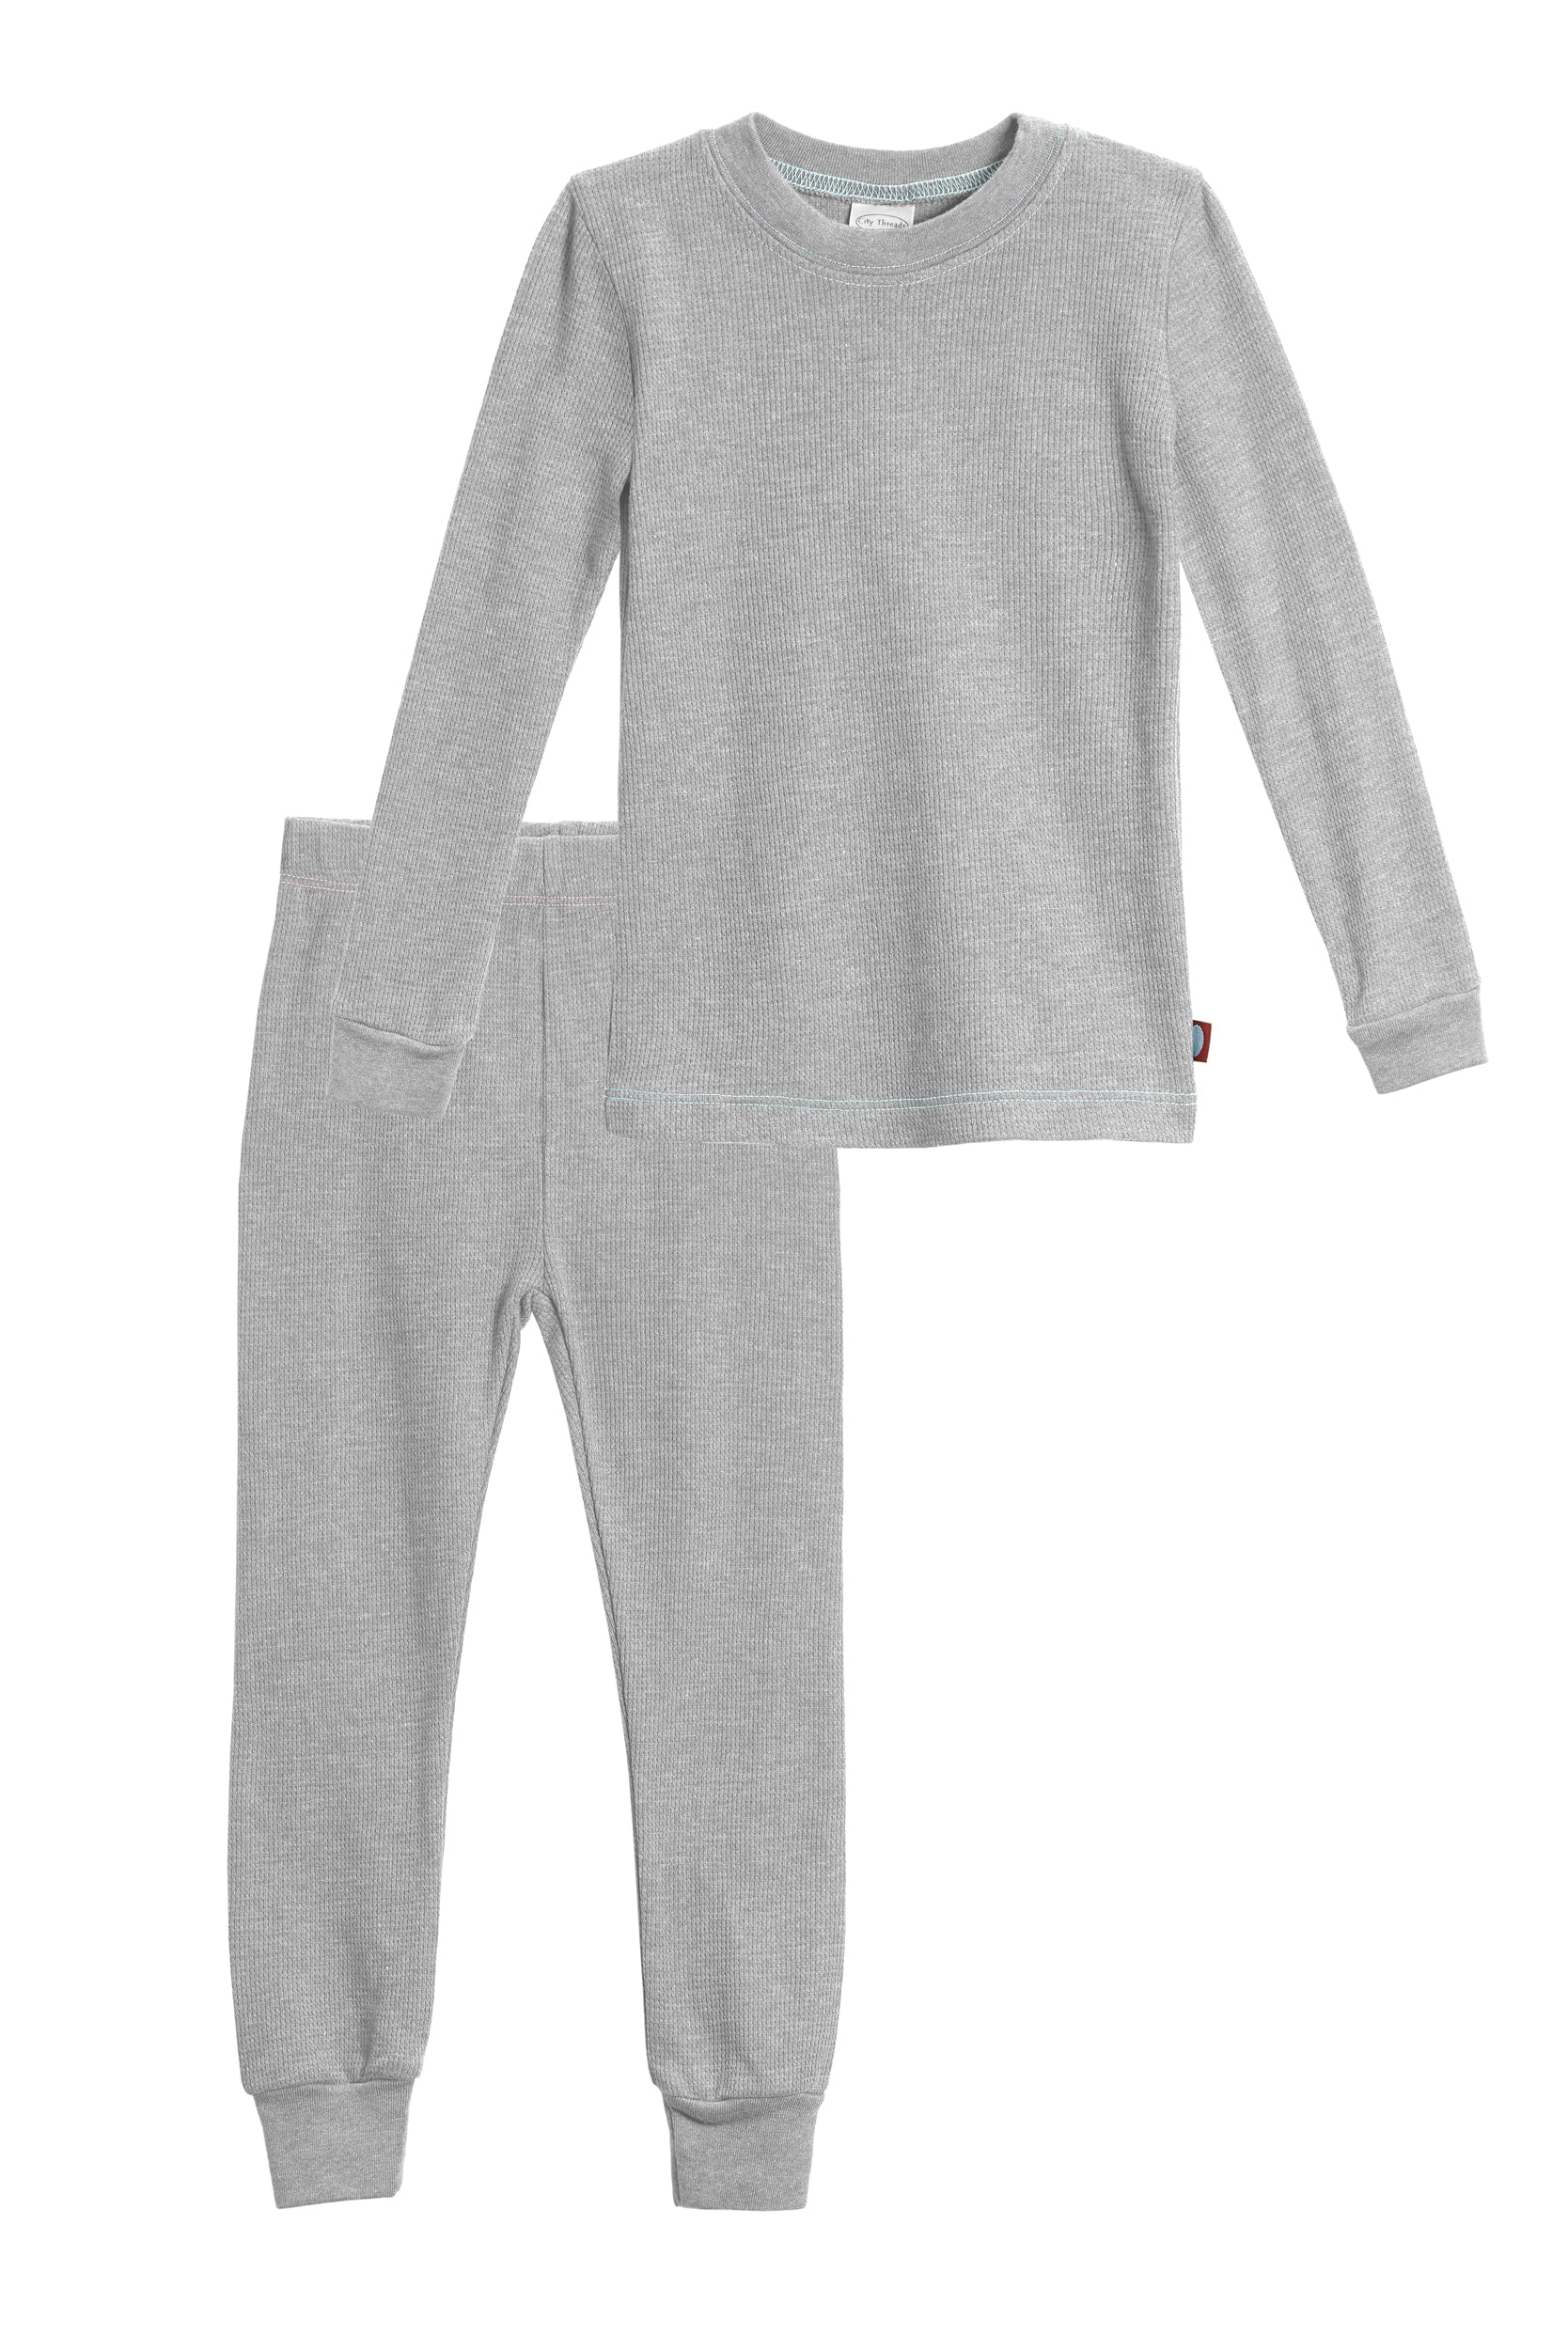  Zando Kids Thermal Underwear Soft Winter Baby Thermal Set  Toddler 2 Piece Base Layer Set Ultra Kids Long Johns Girls Fleece Lined  Thermals Boys Cold Weather Gear Light Grey X-Large